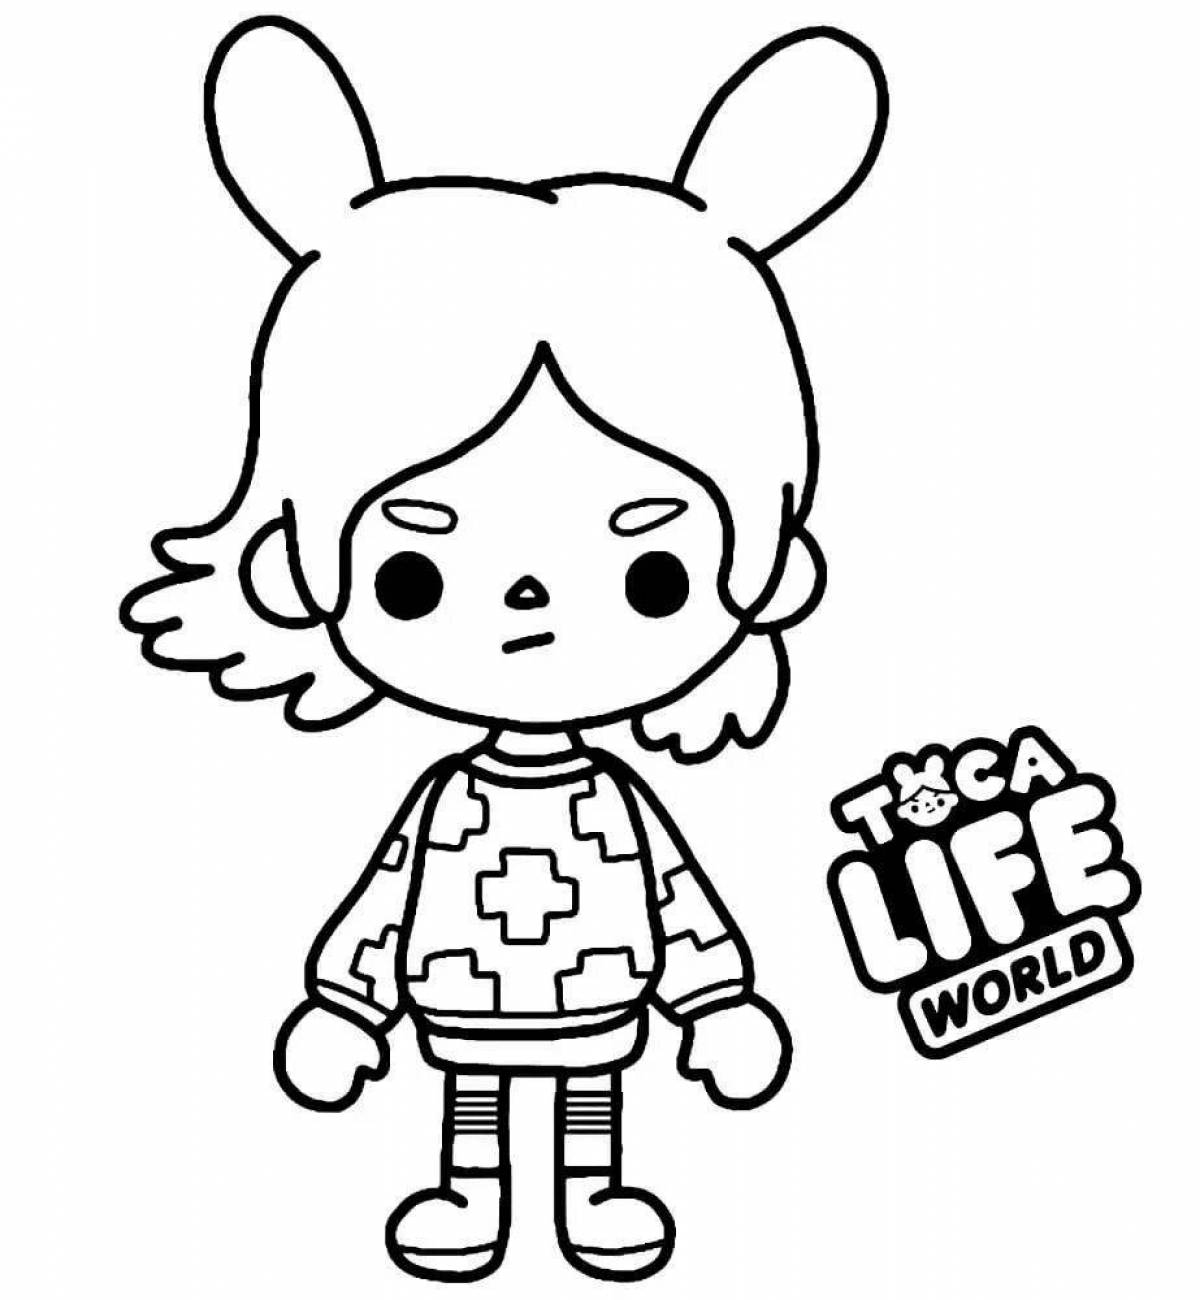 Toca life world bright coloring page